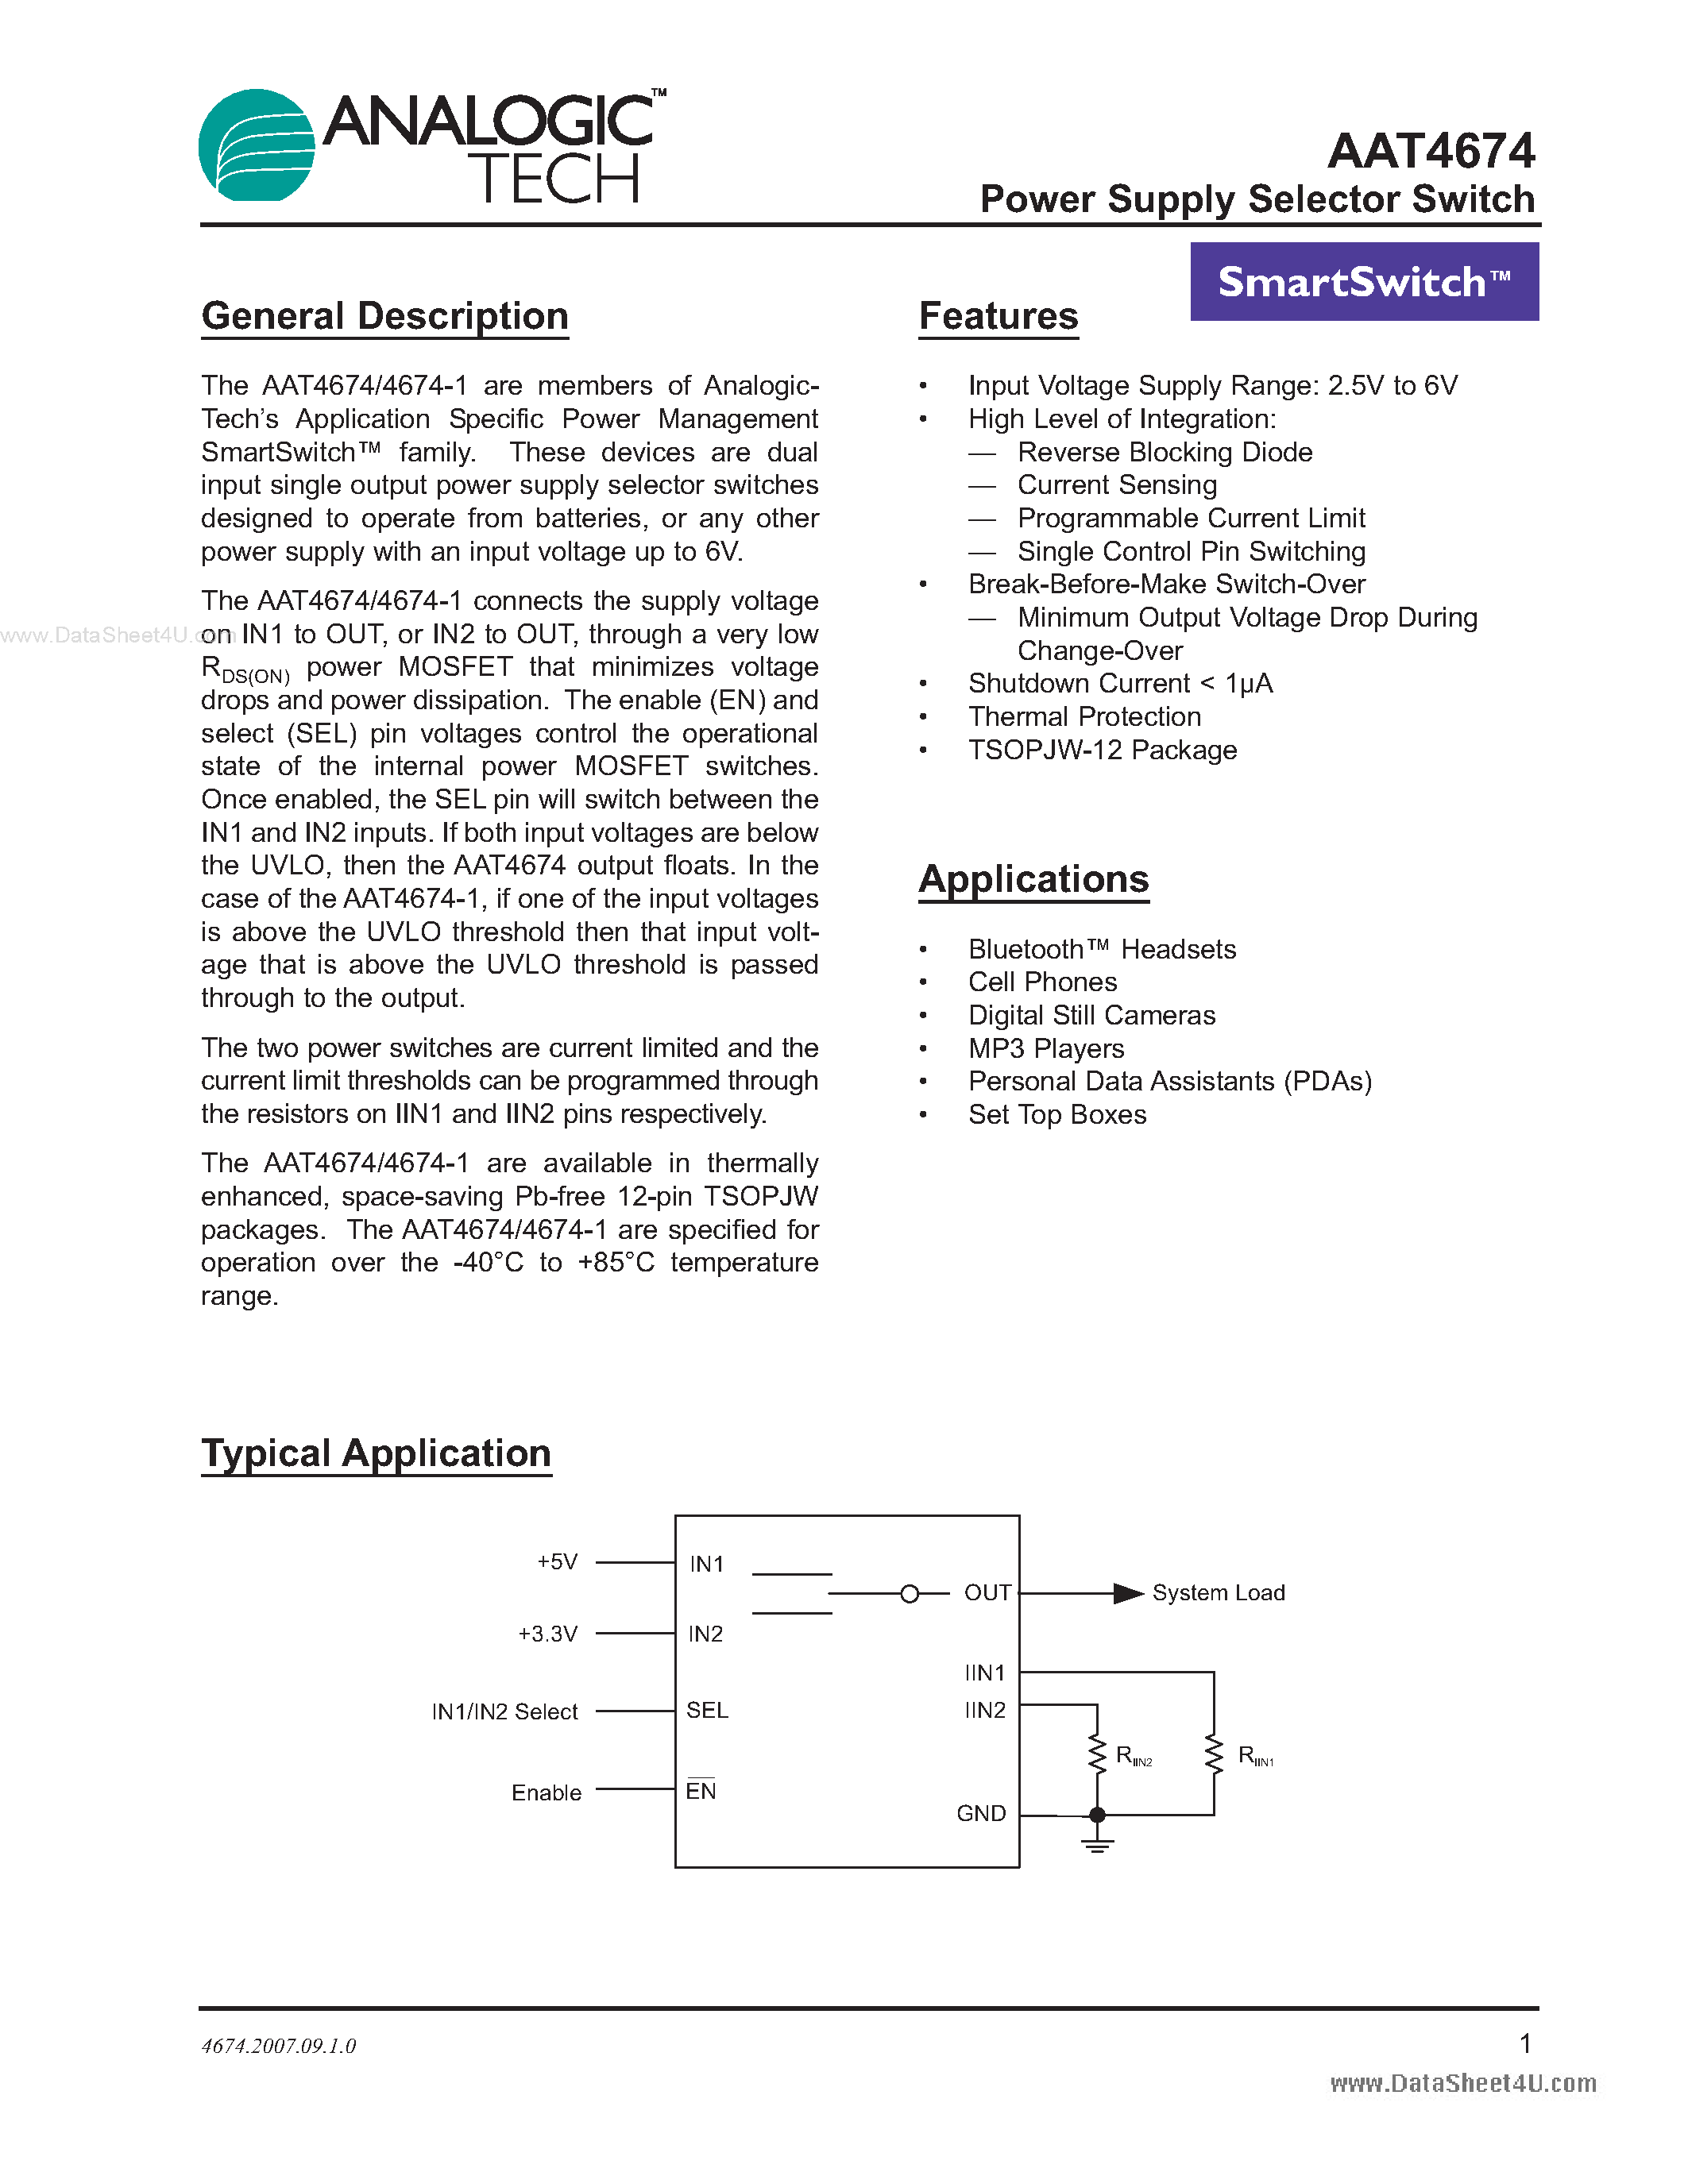 Datasheet AAT4674 - Power Supply Selector Switch page 1